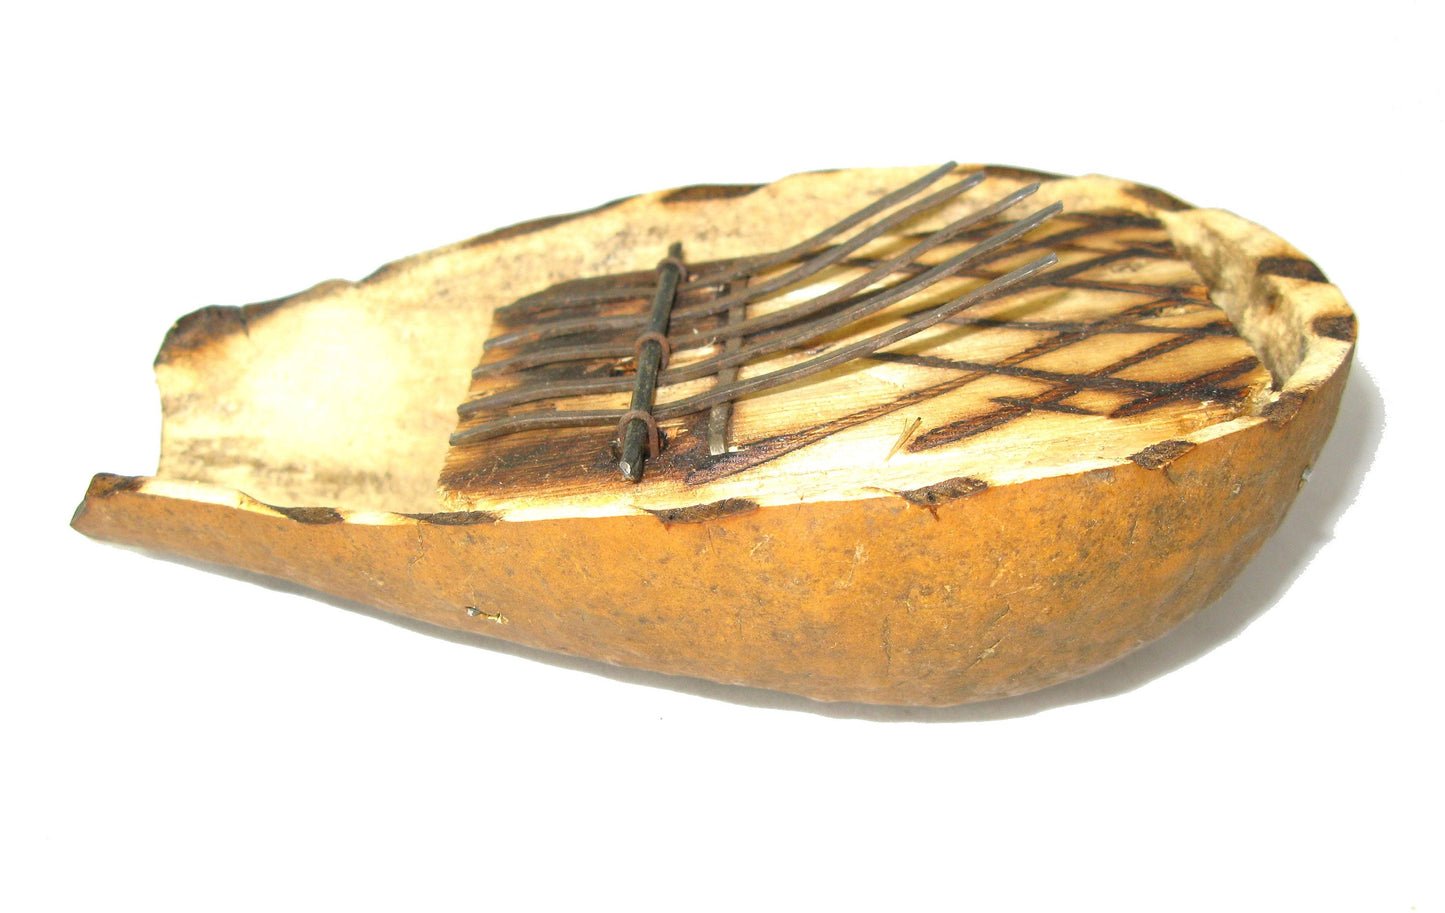 Fair Trade African 5 Note Thumb Piano Kalimba Mbira Finger Piano - Hand crafted - Gourd Case - Tell Stories with Music